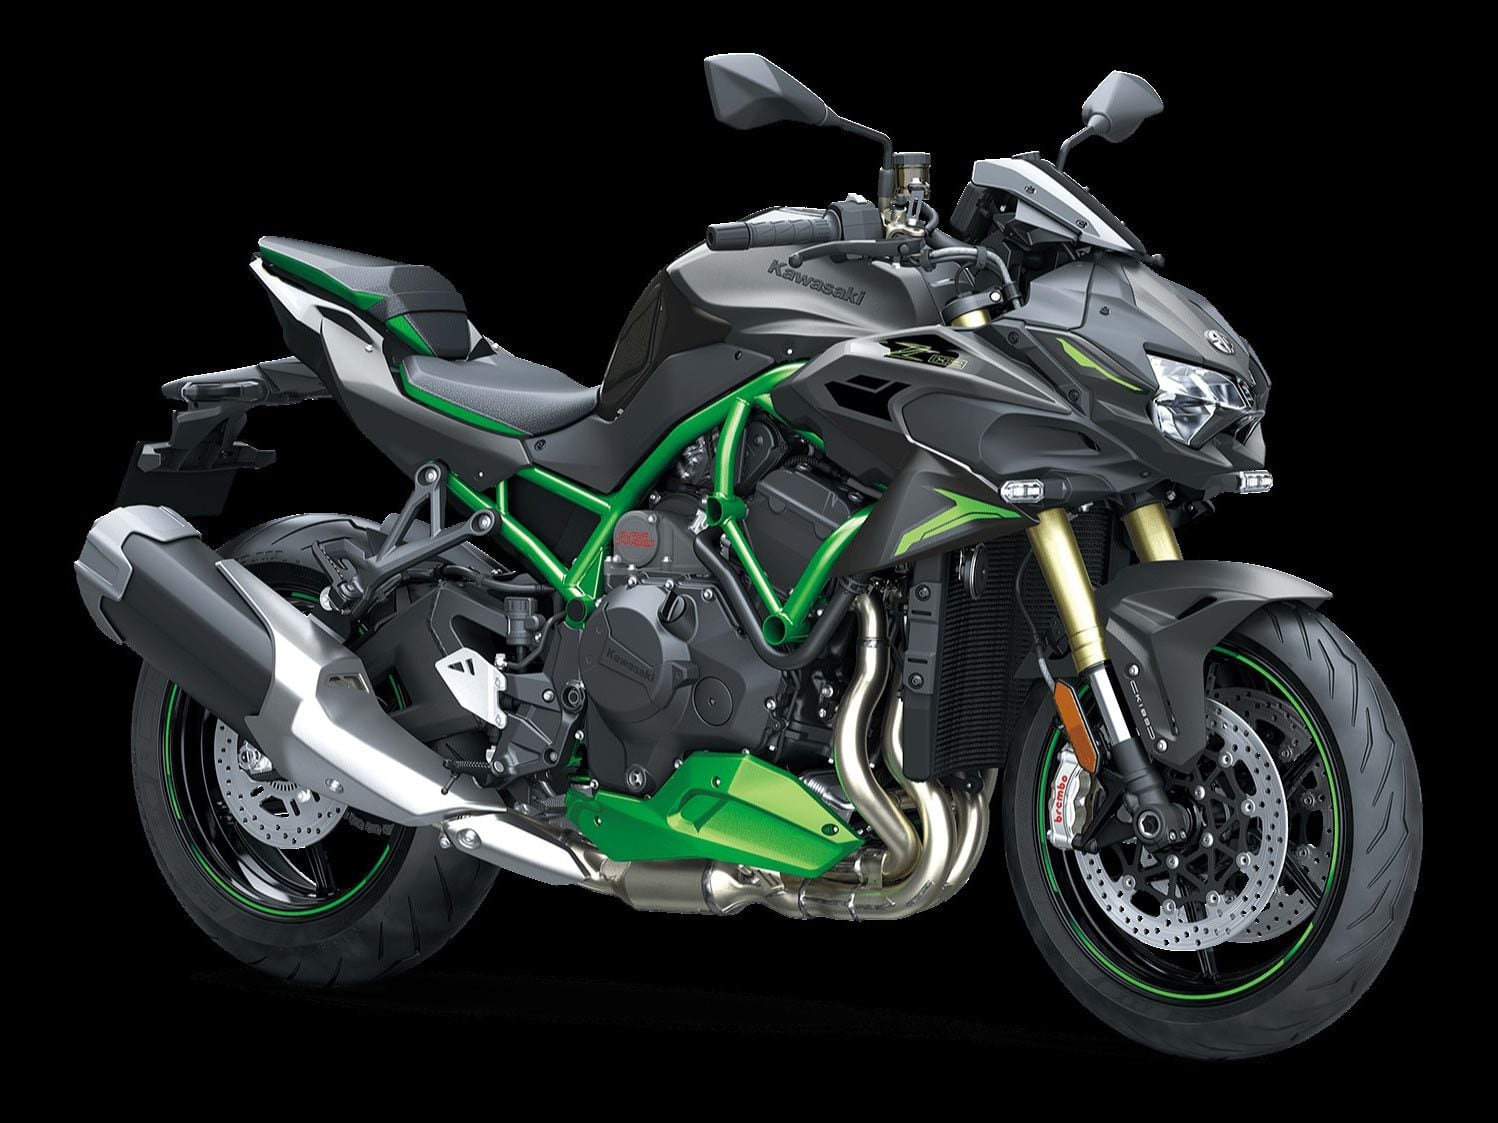 Less beauty, more beast. Kawasaki’s Z H2’s styling won’t please all tastes, but at least it’s not bland.